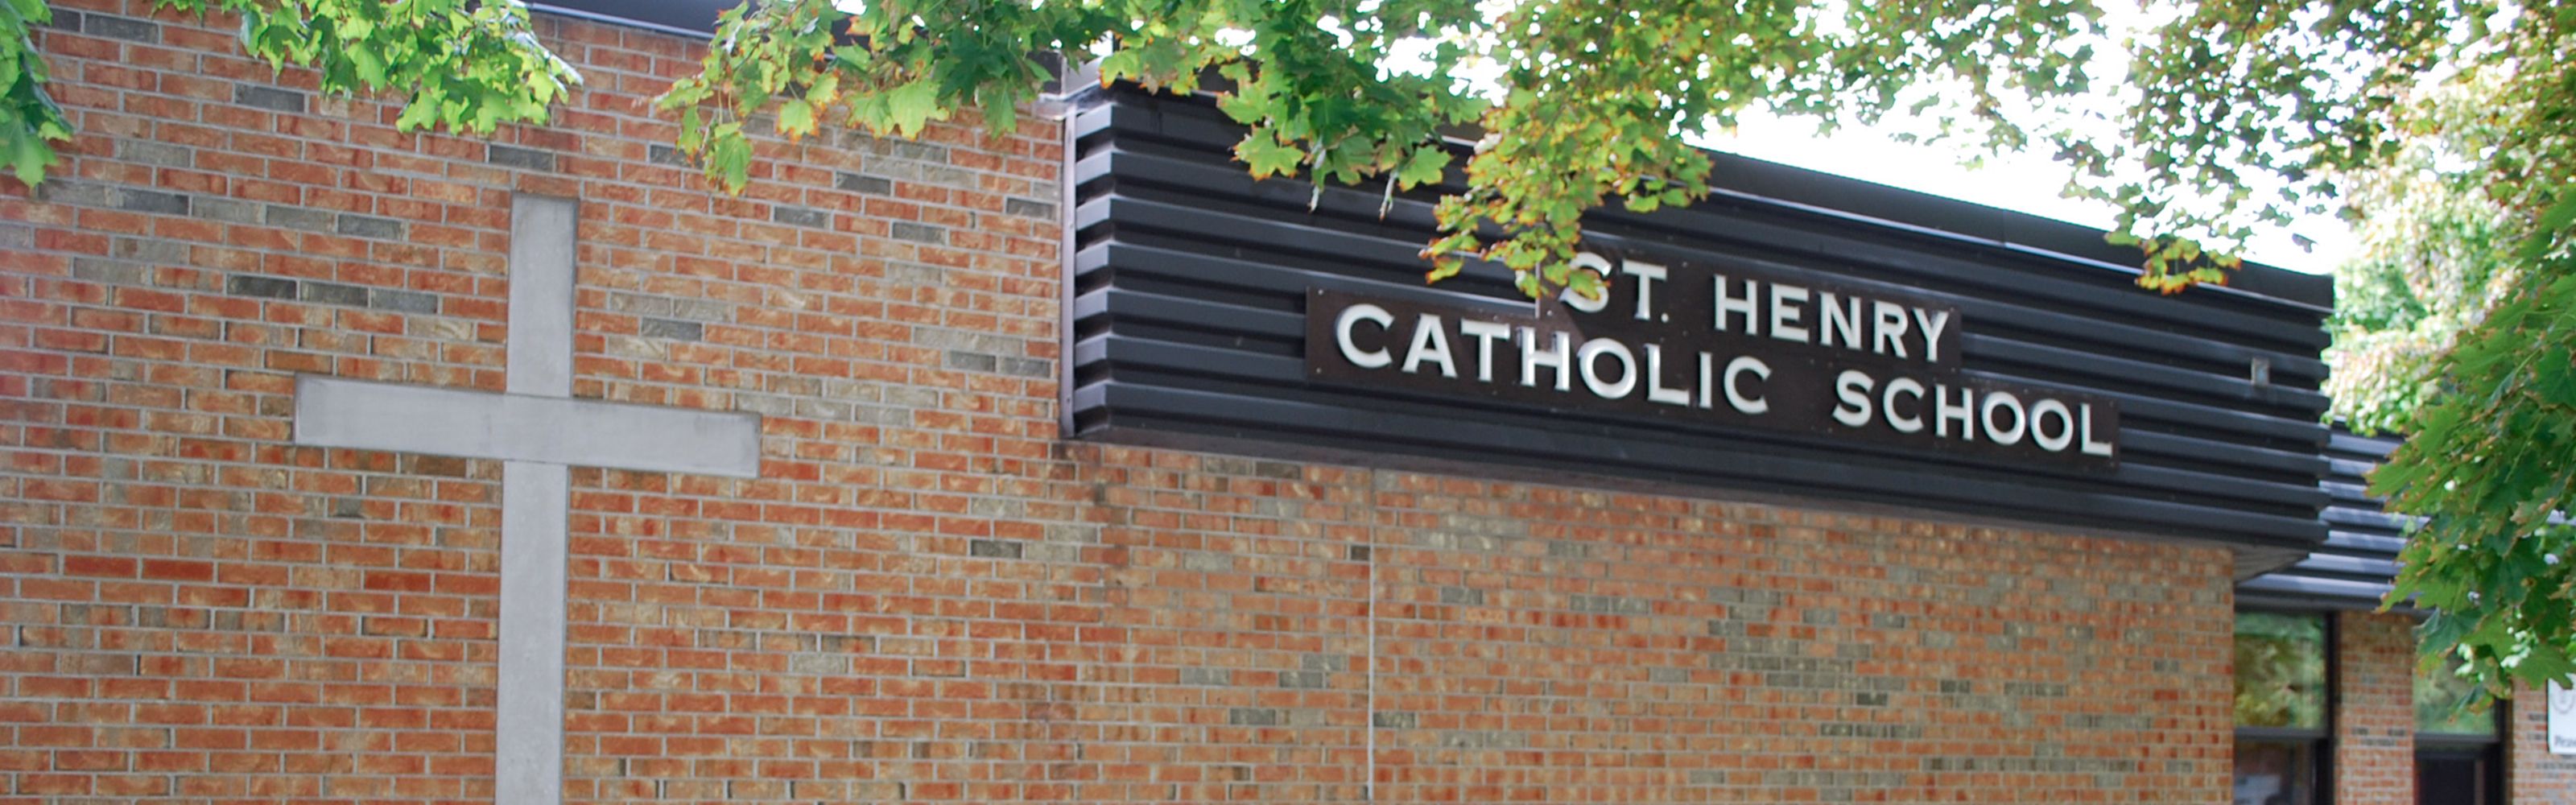 The front of the St. Henry Catholic School building.